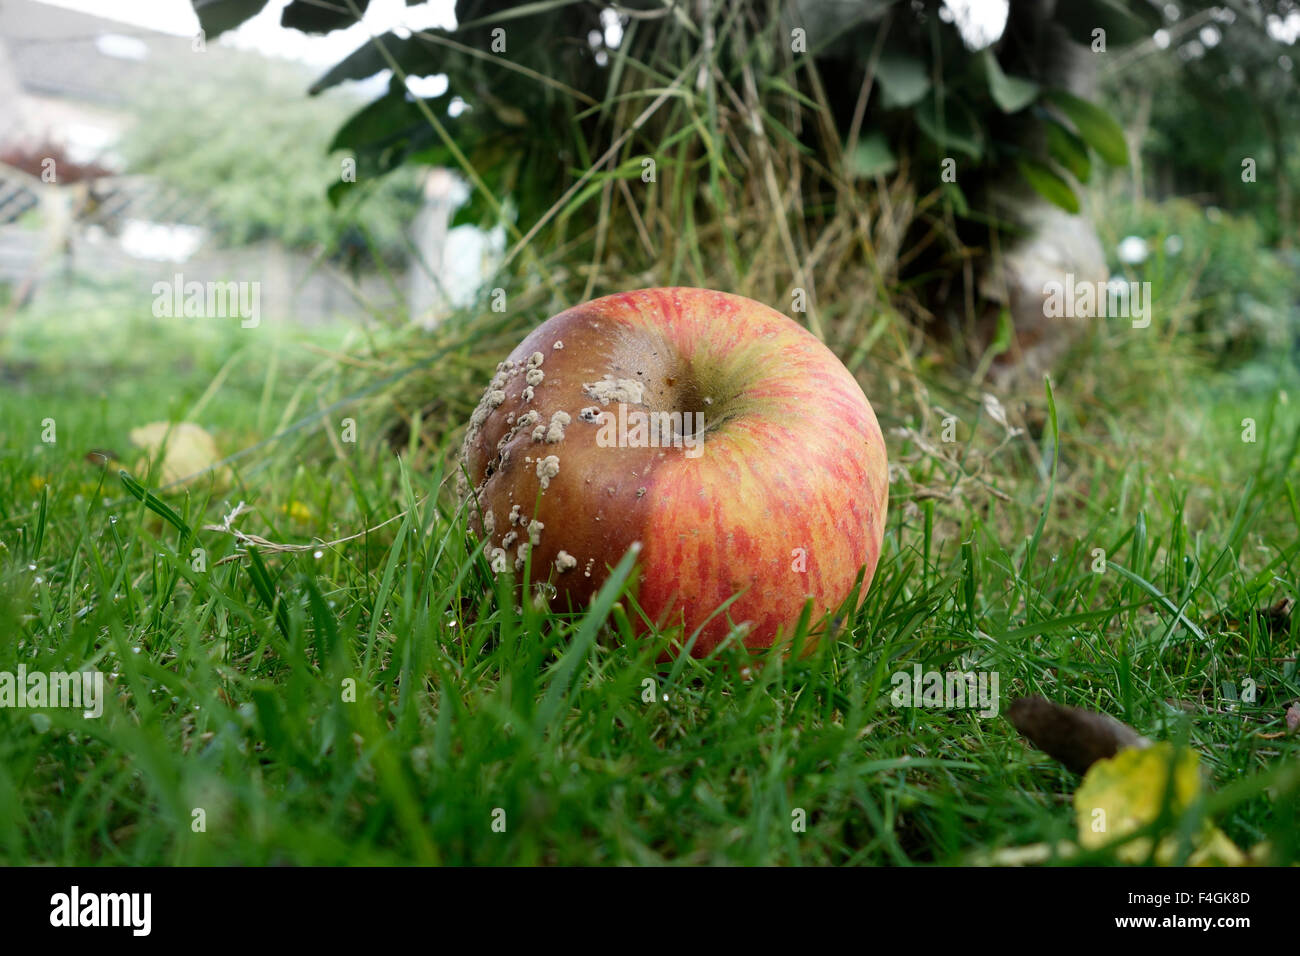 Red apple rotting on lawn, ground, fallen of tree. Stock Photo